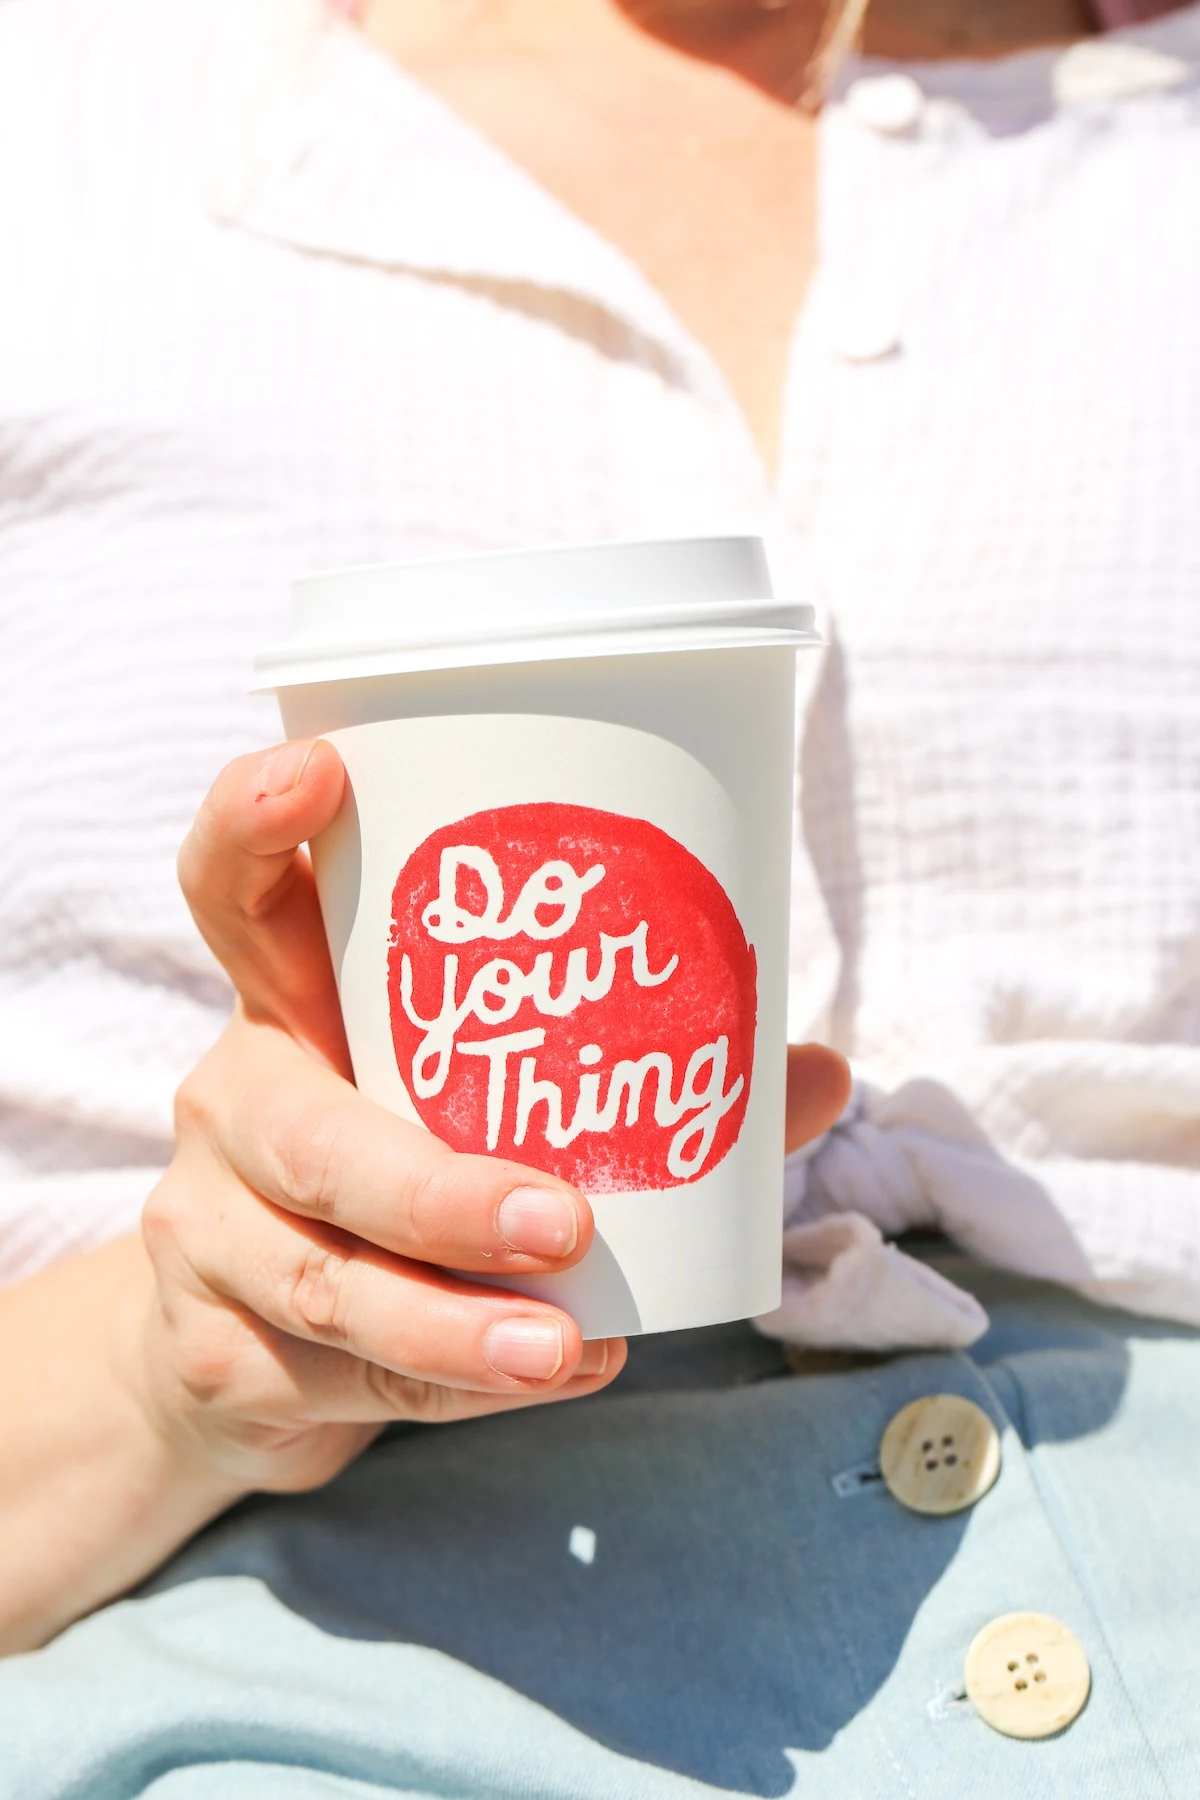 Close-up of woman's hand holding a white paper coffee up with the logo reading "Do Your Thing" on a white circle.